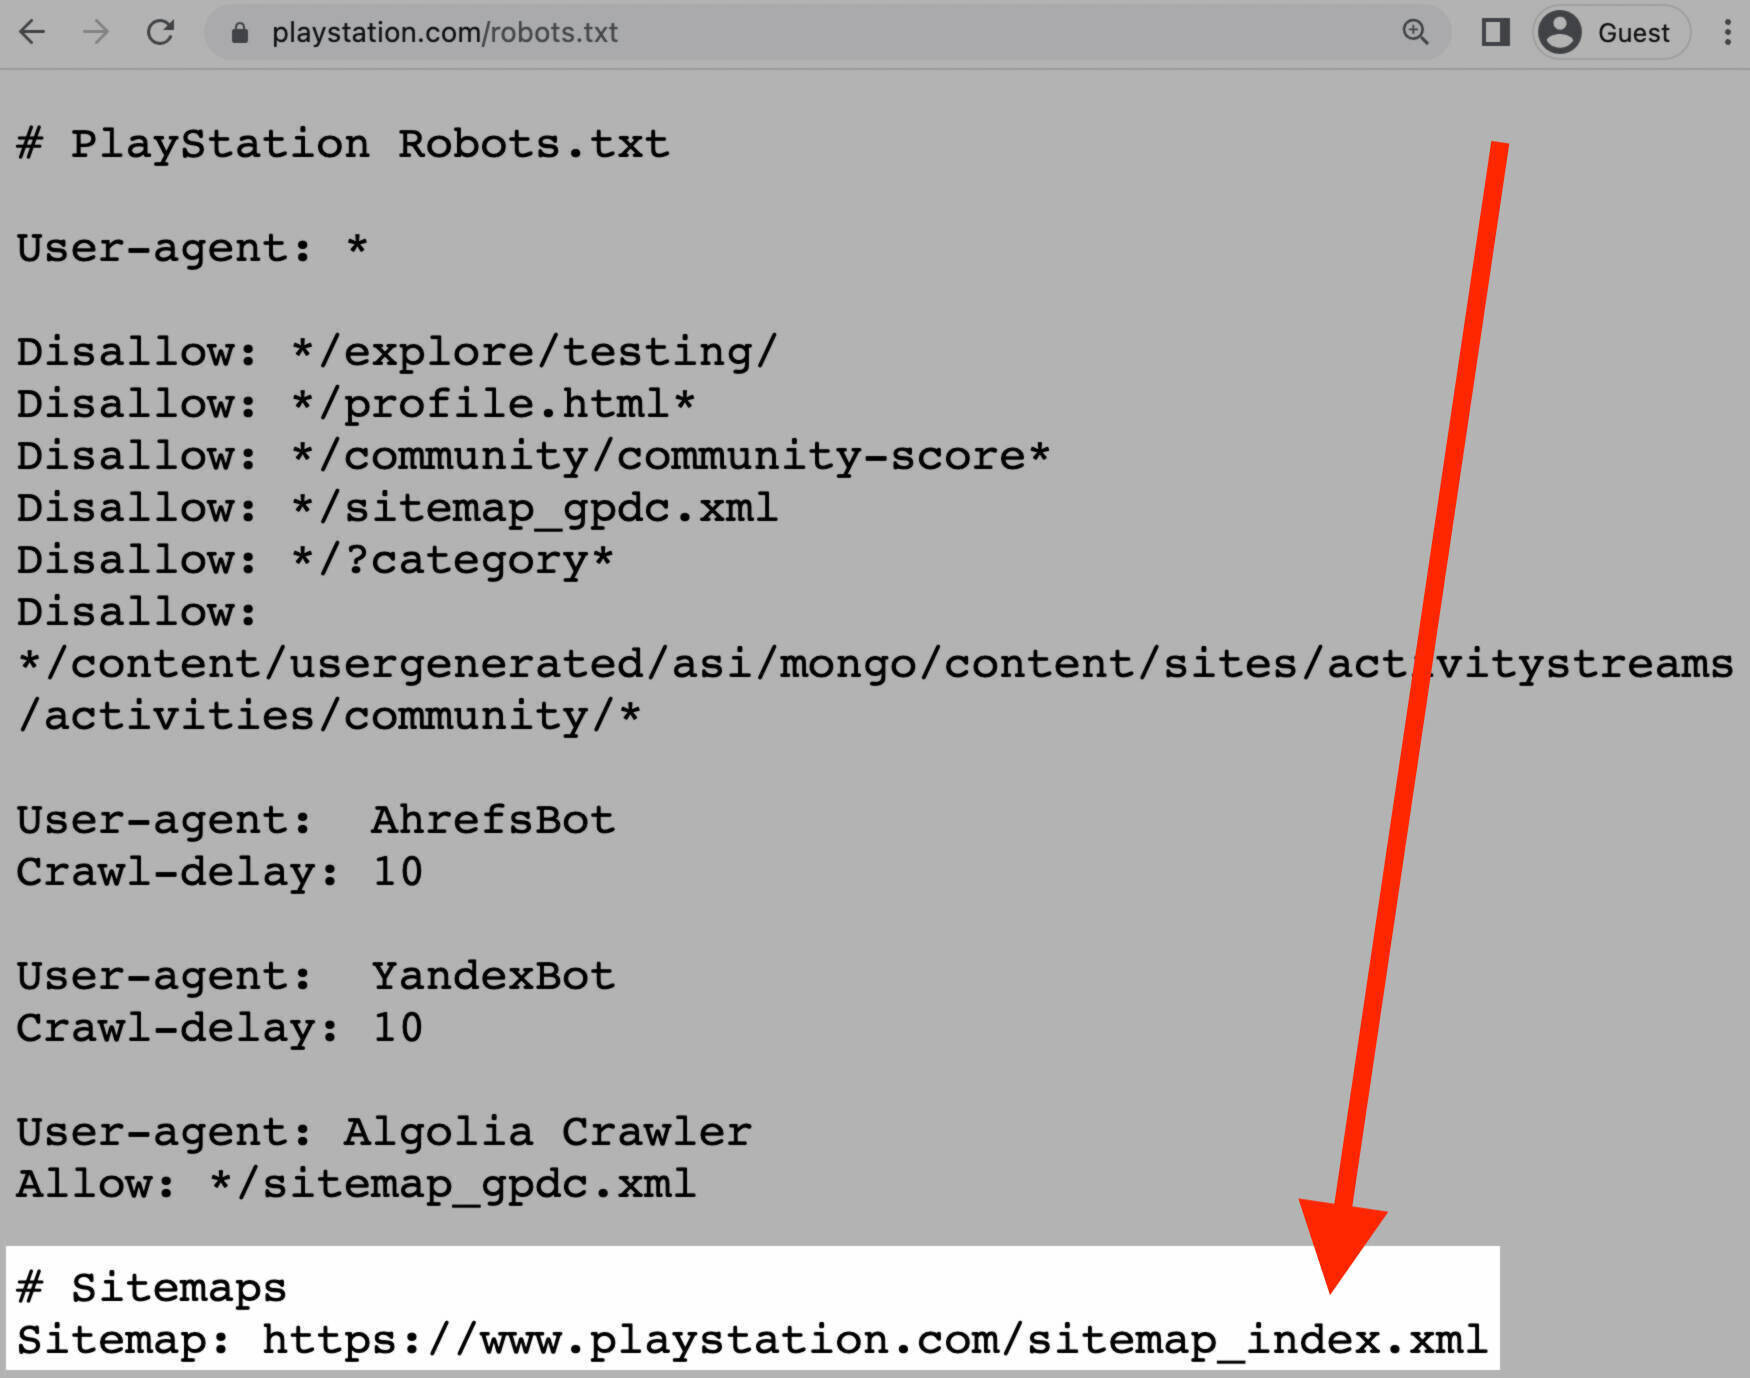 Playstation's robots.txt with their sitemap at the bottom